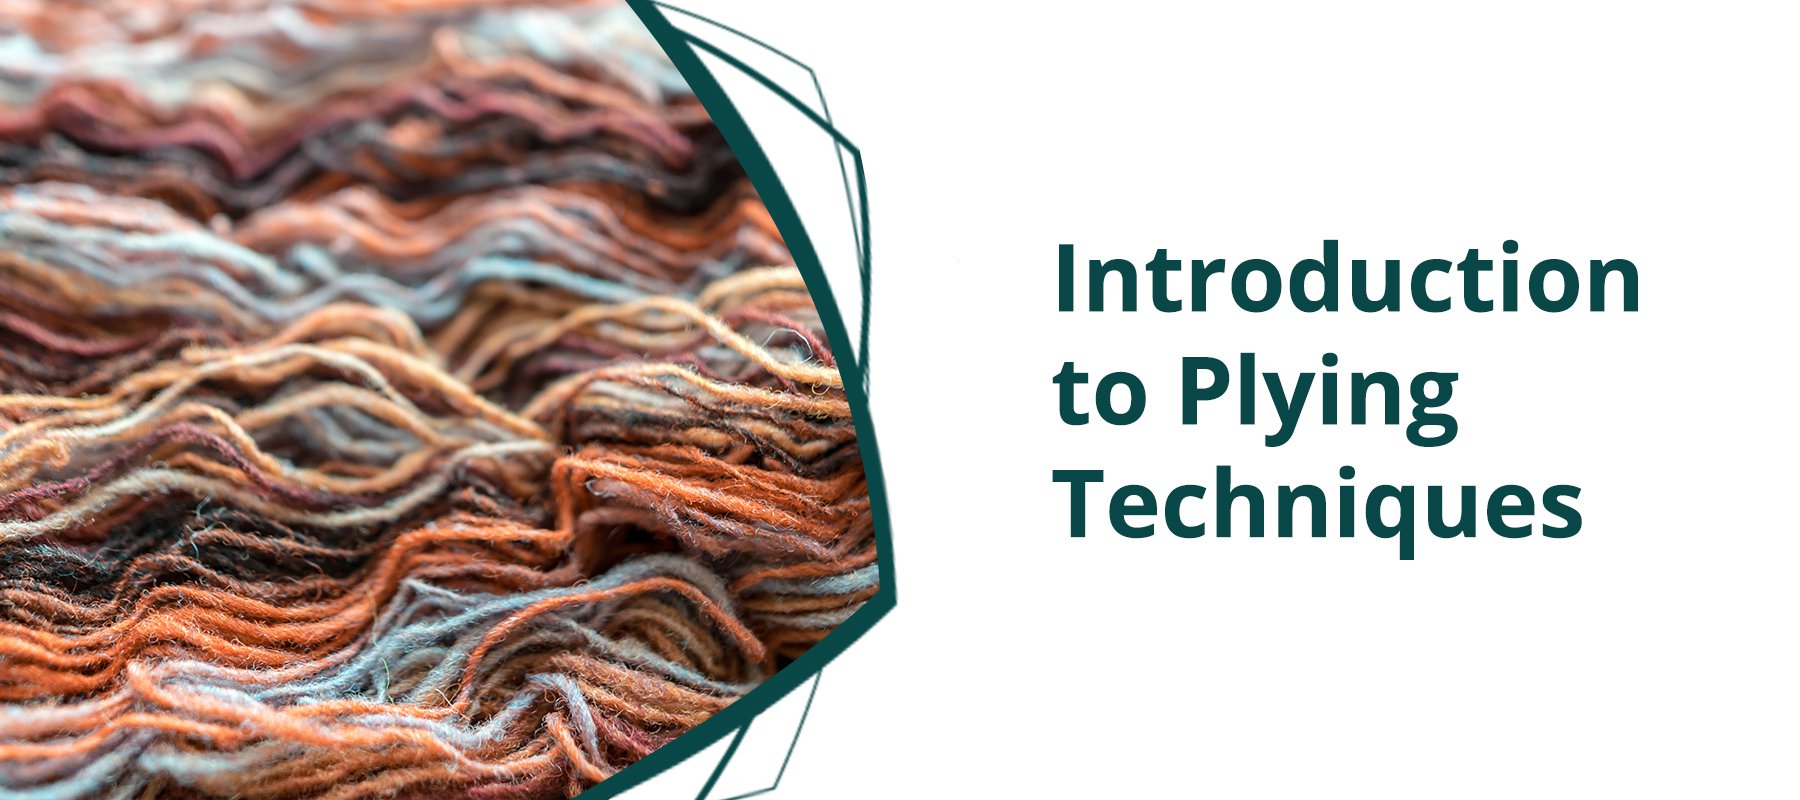 Introduction to Plying Techniques